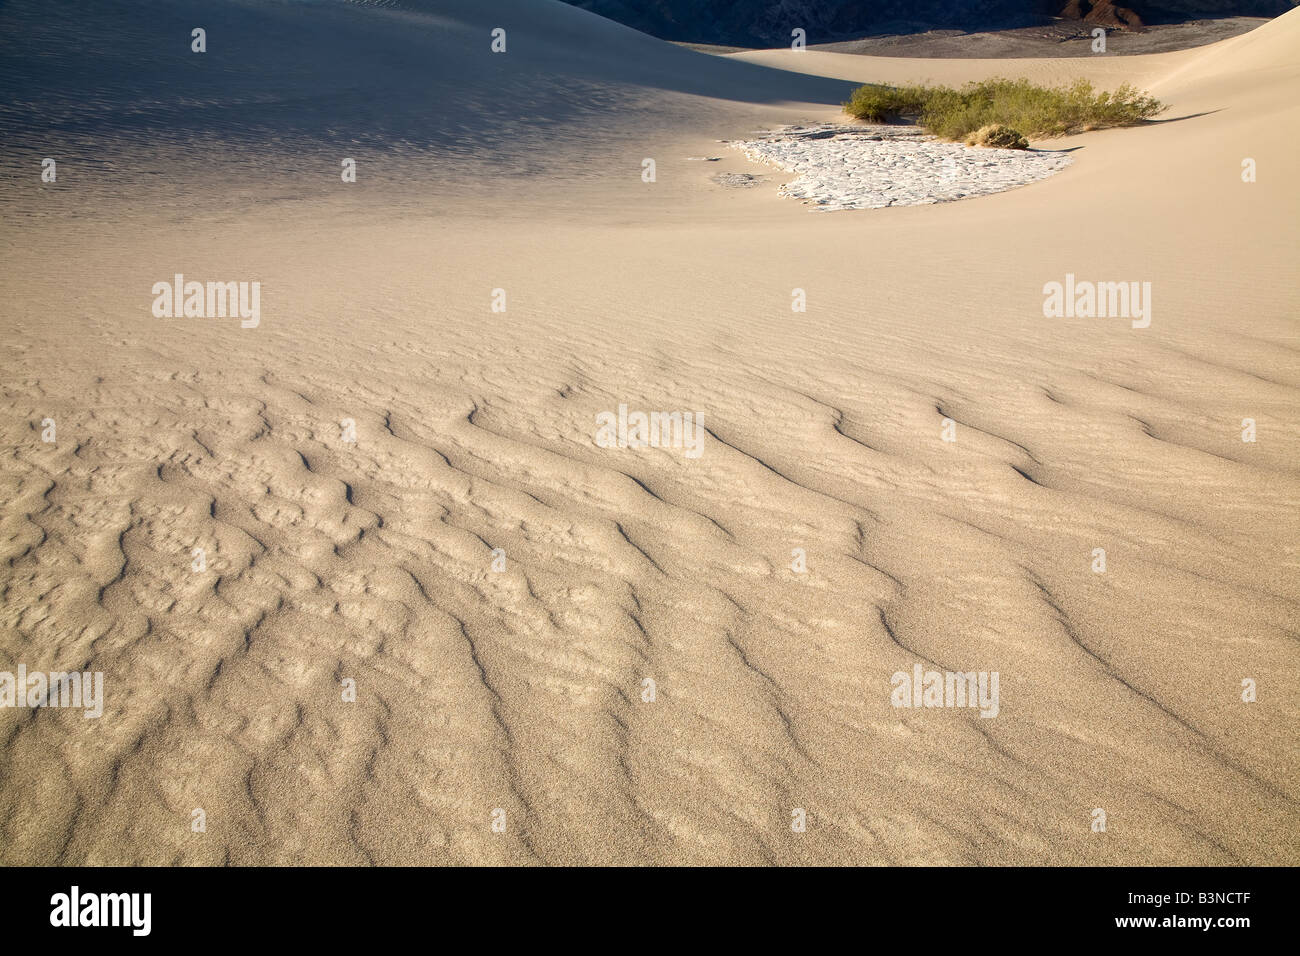 Ripples in the sand leads to surviving plants in the distance. Stock Photo